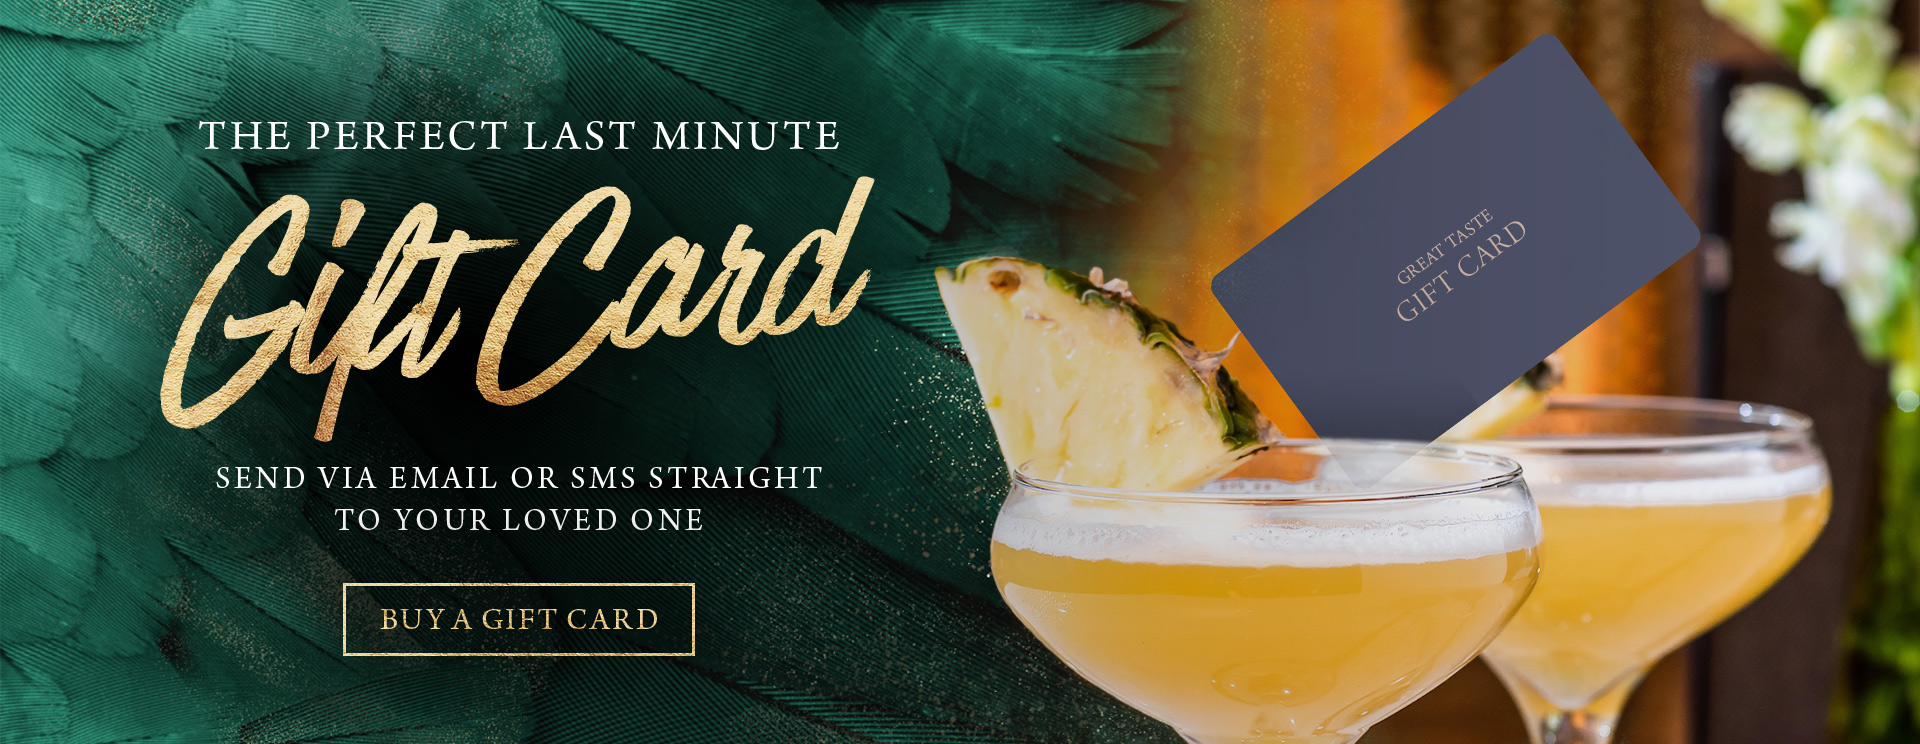 Give the gift of a gift card at The St George & Dragon